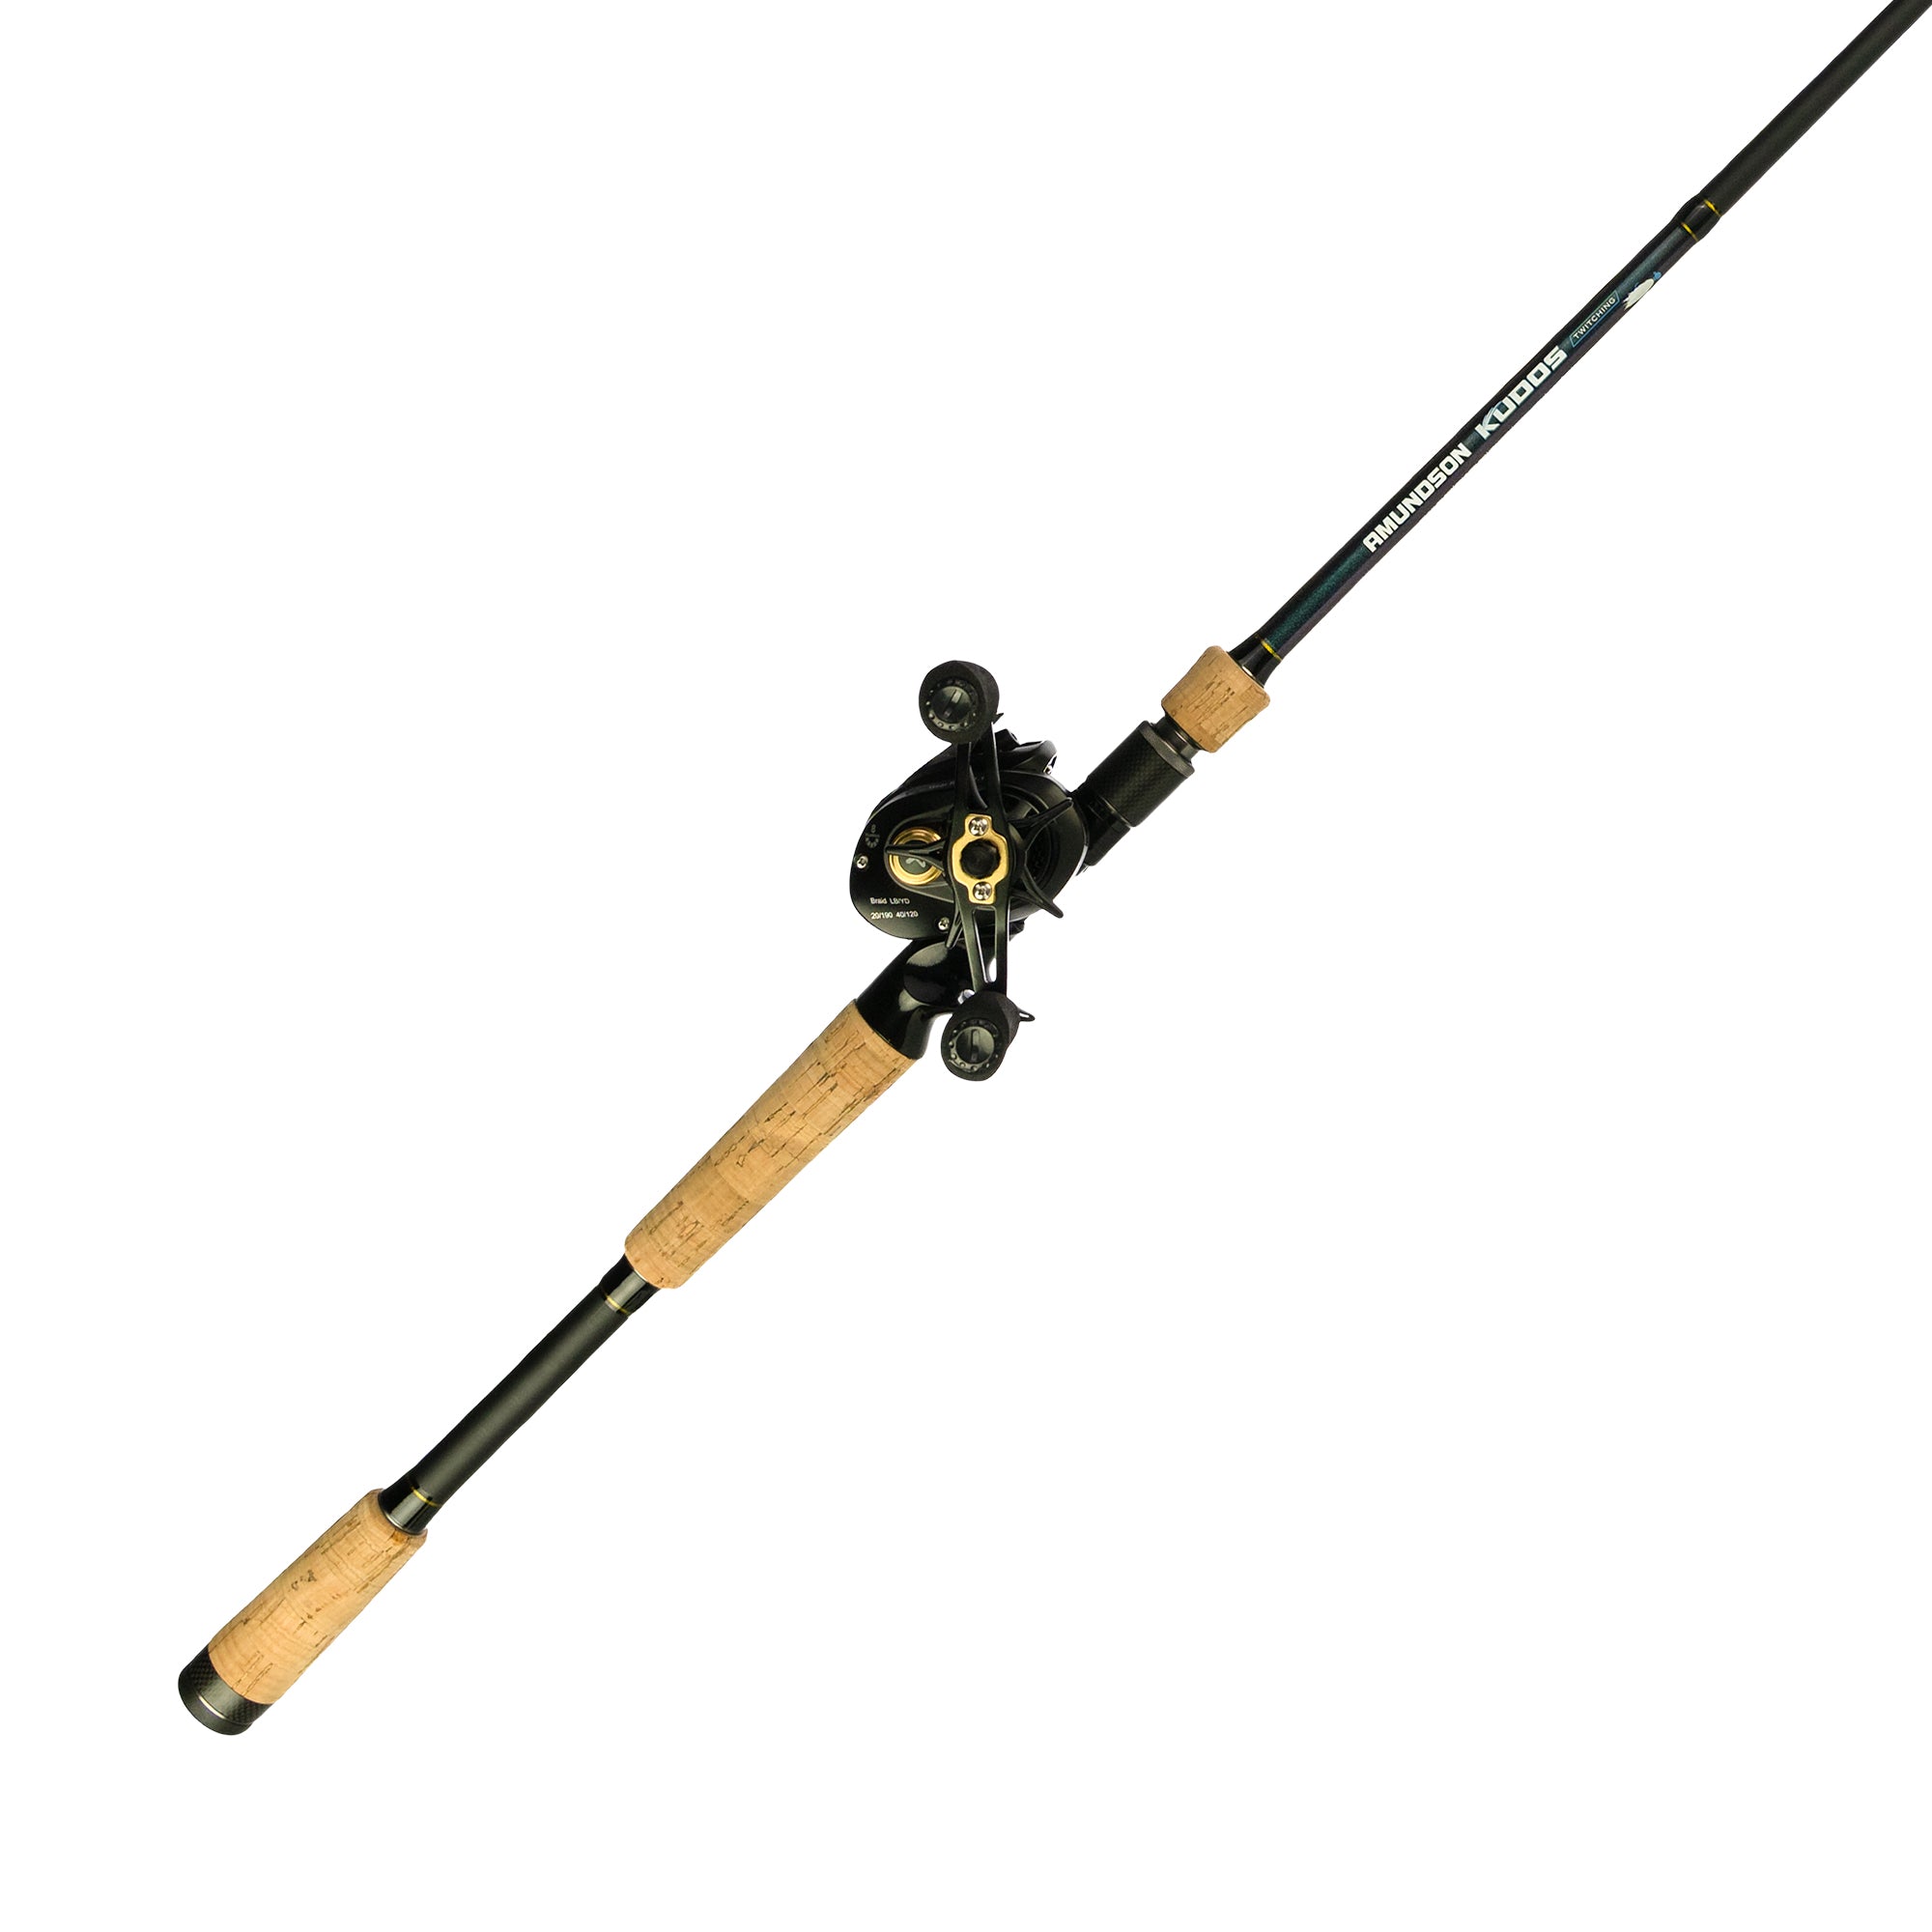 Kudos Bait Casting Combo for Twitching Jigs KDC12-2L